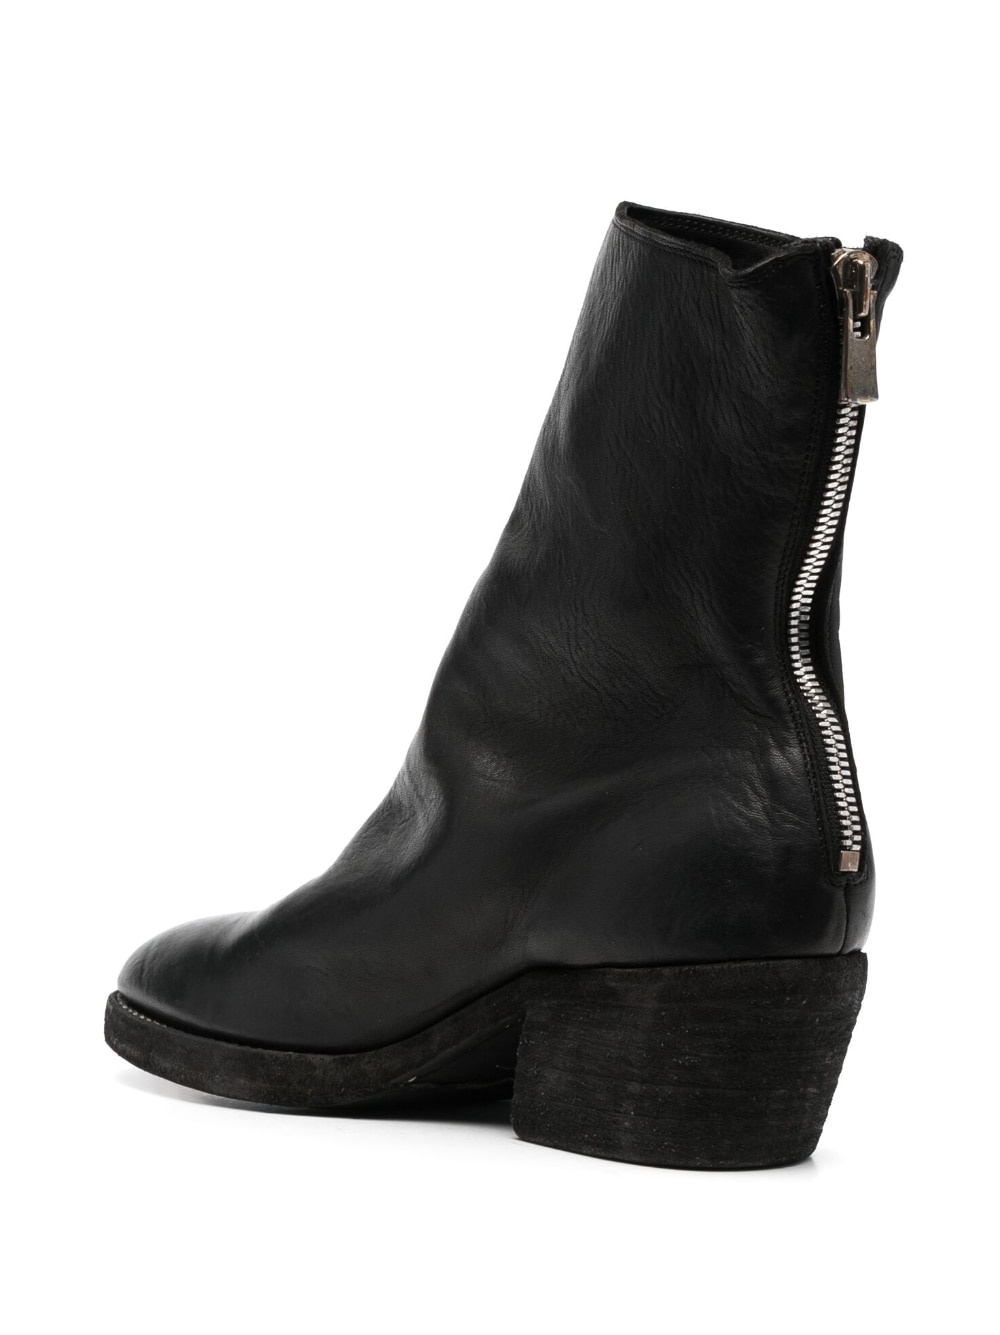 zip-up leather boots - 3